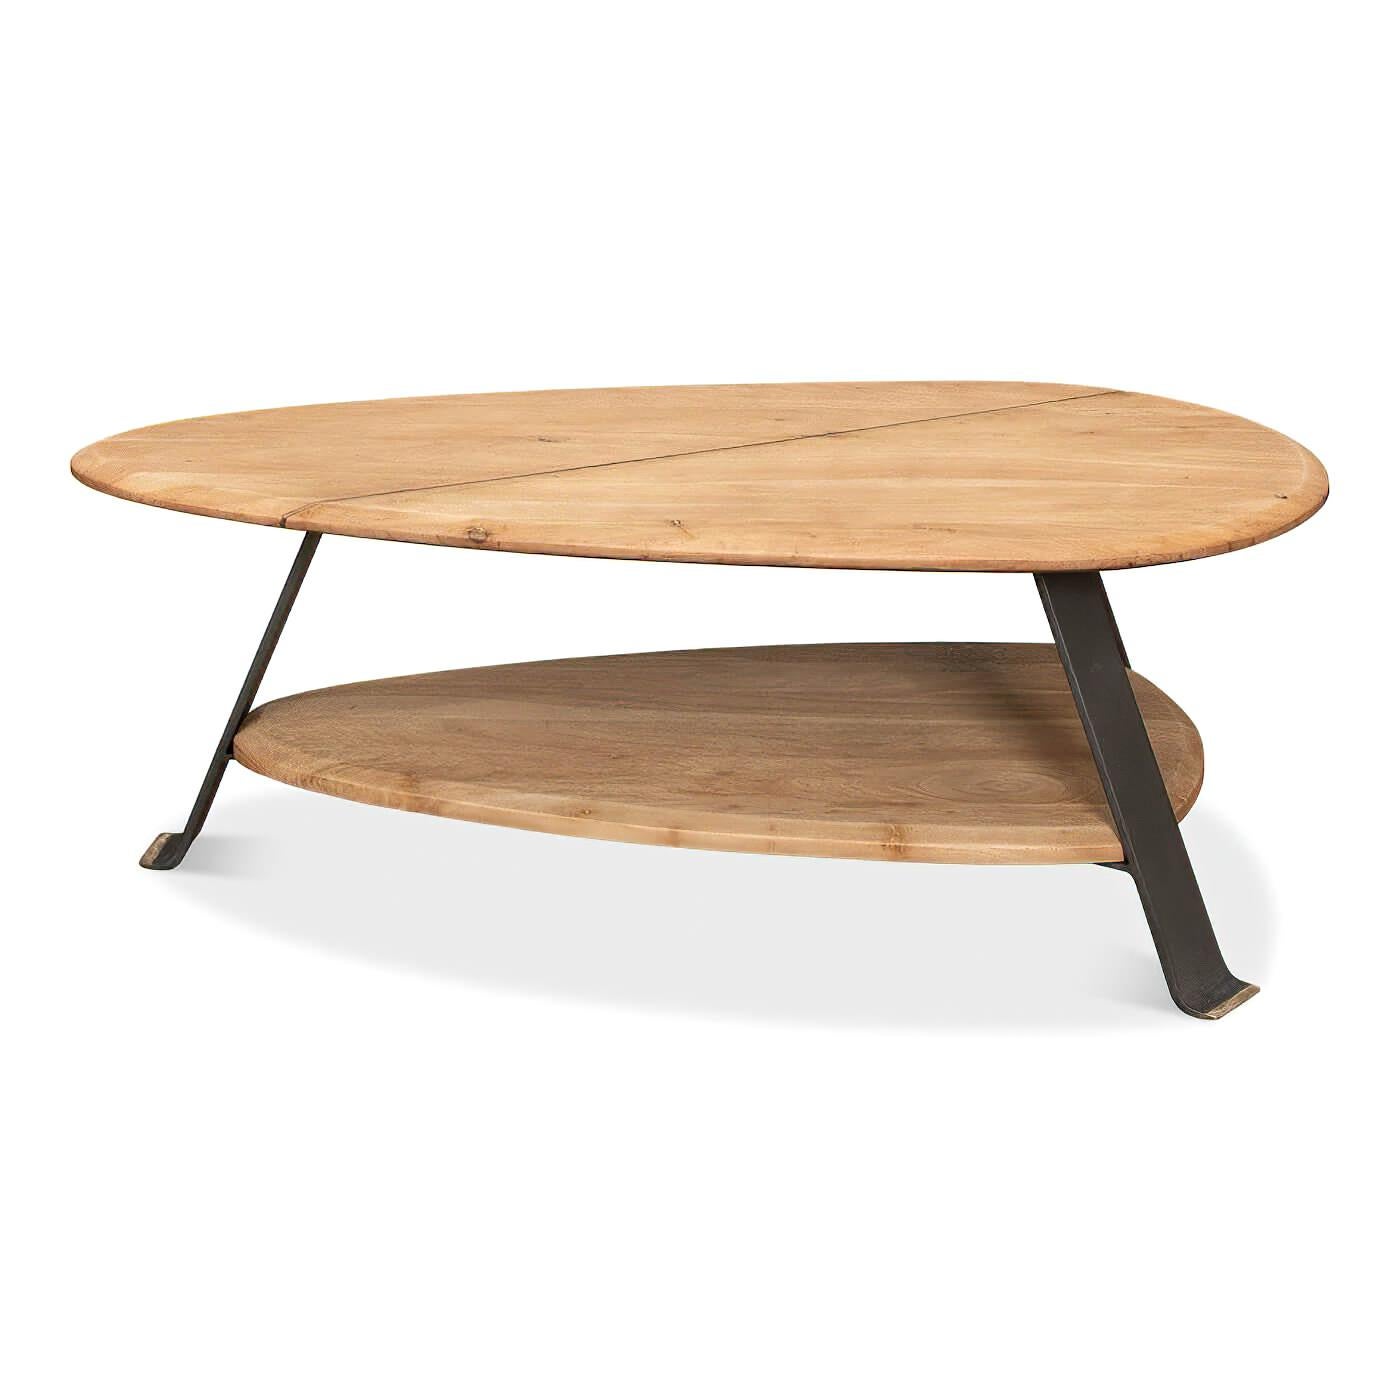 An organic modern style coffee table inspired by worn river stones and hand-worked steel. This table has an artistic meets industrial feel. 

Dimensions 
48